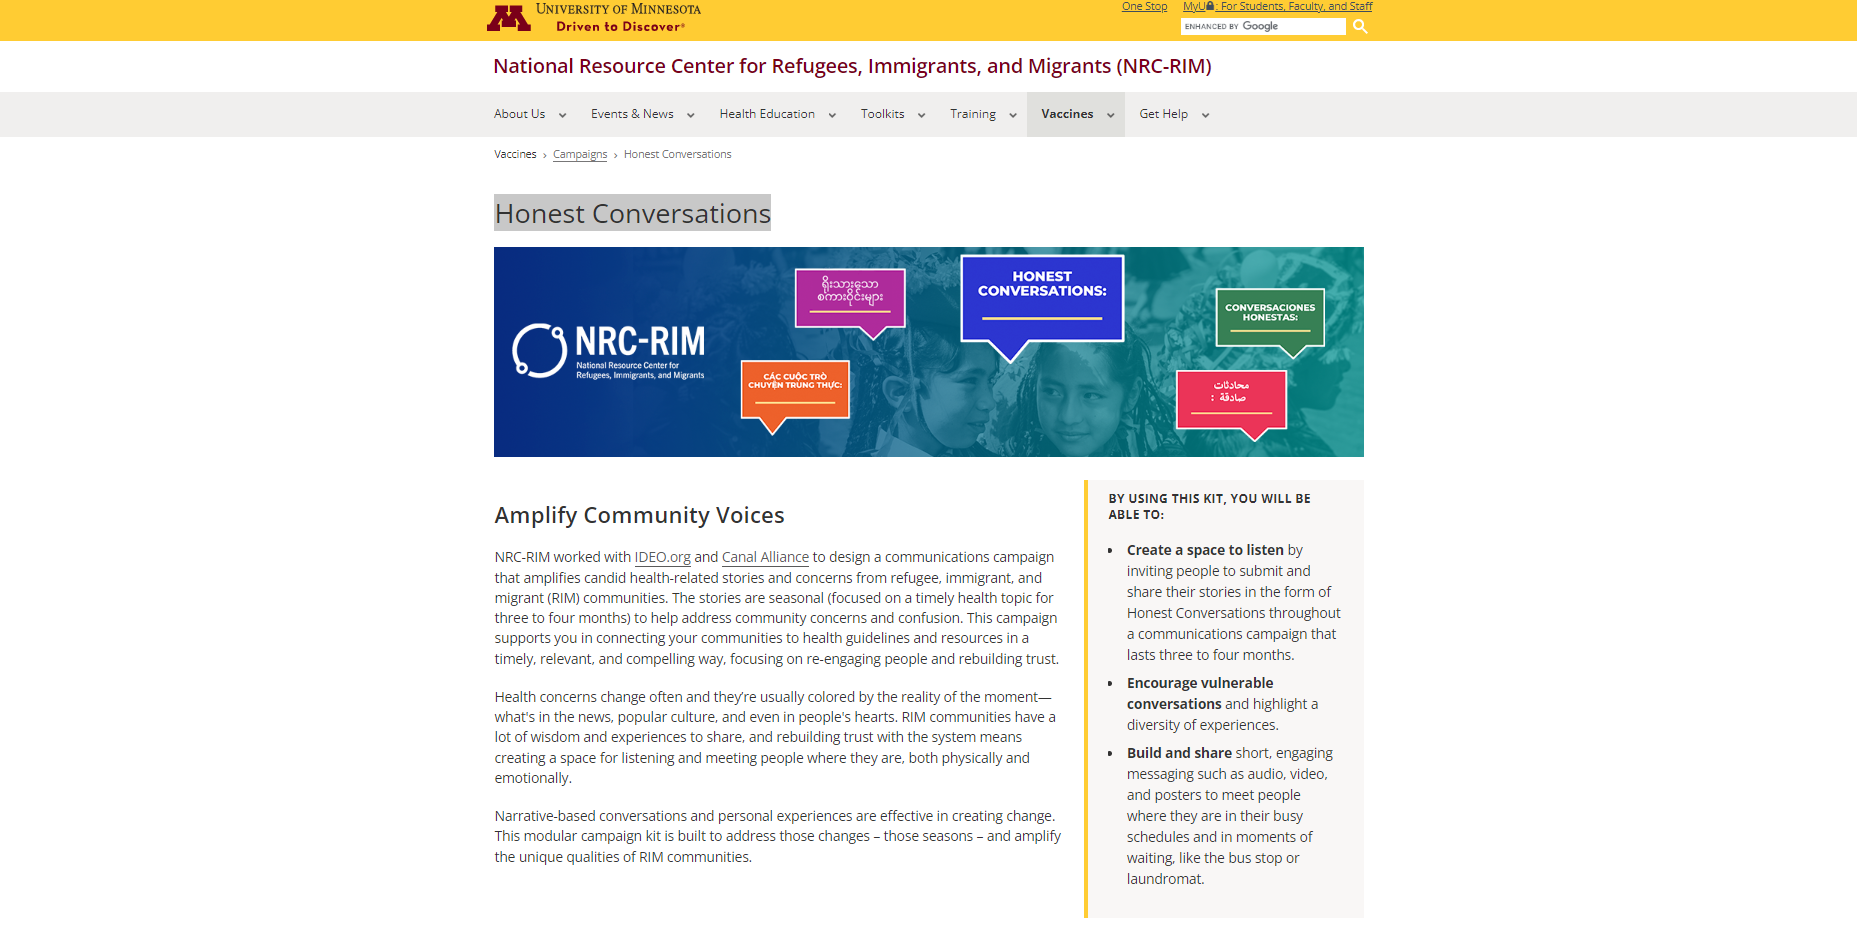 Website with a white background and black text with the University of Minnesota and NRC-RIM logo at the top. An image of two young girls with text boxes containing the words "Honest Conversations" in multiple languages is on the middle of the page.